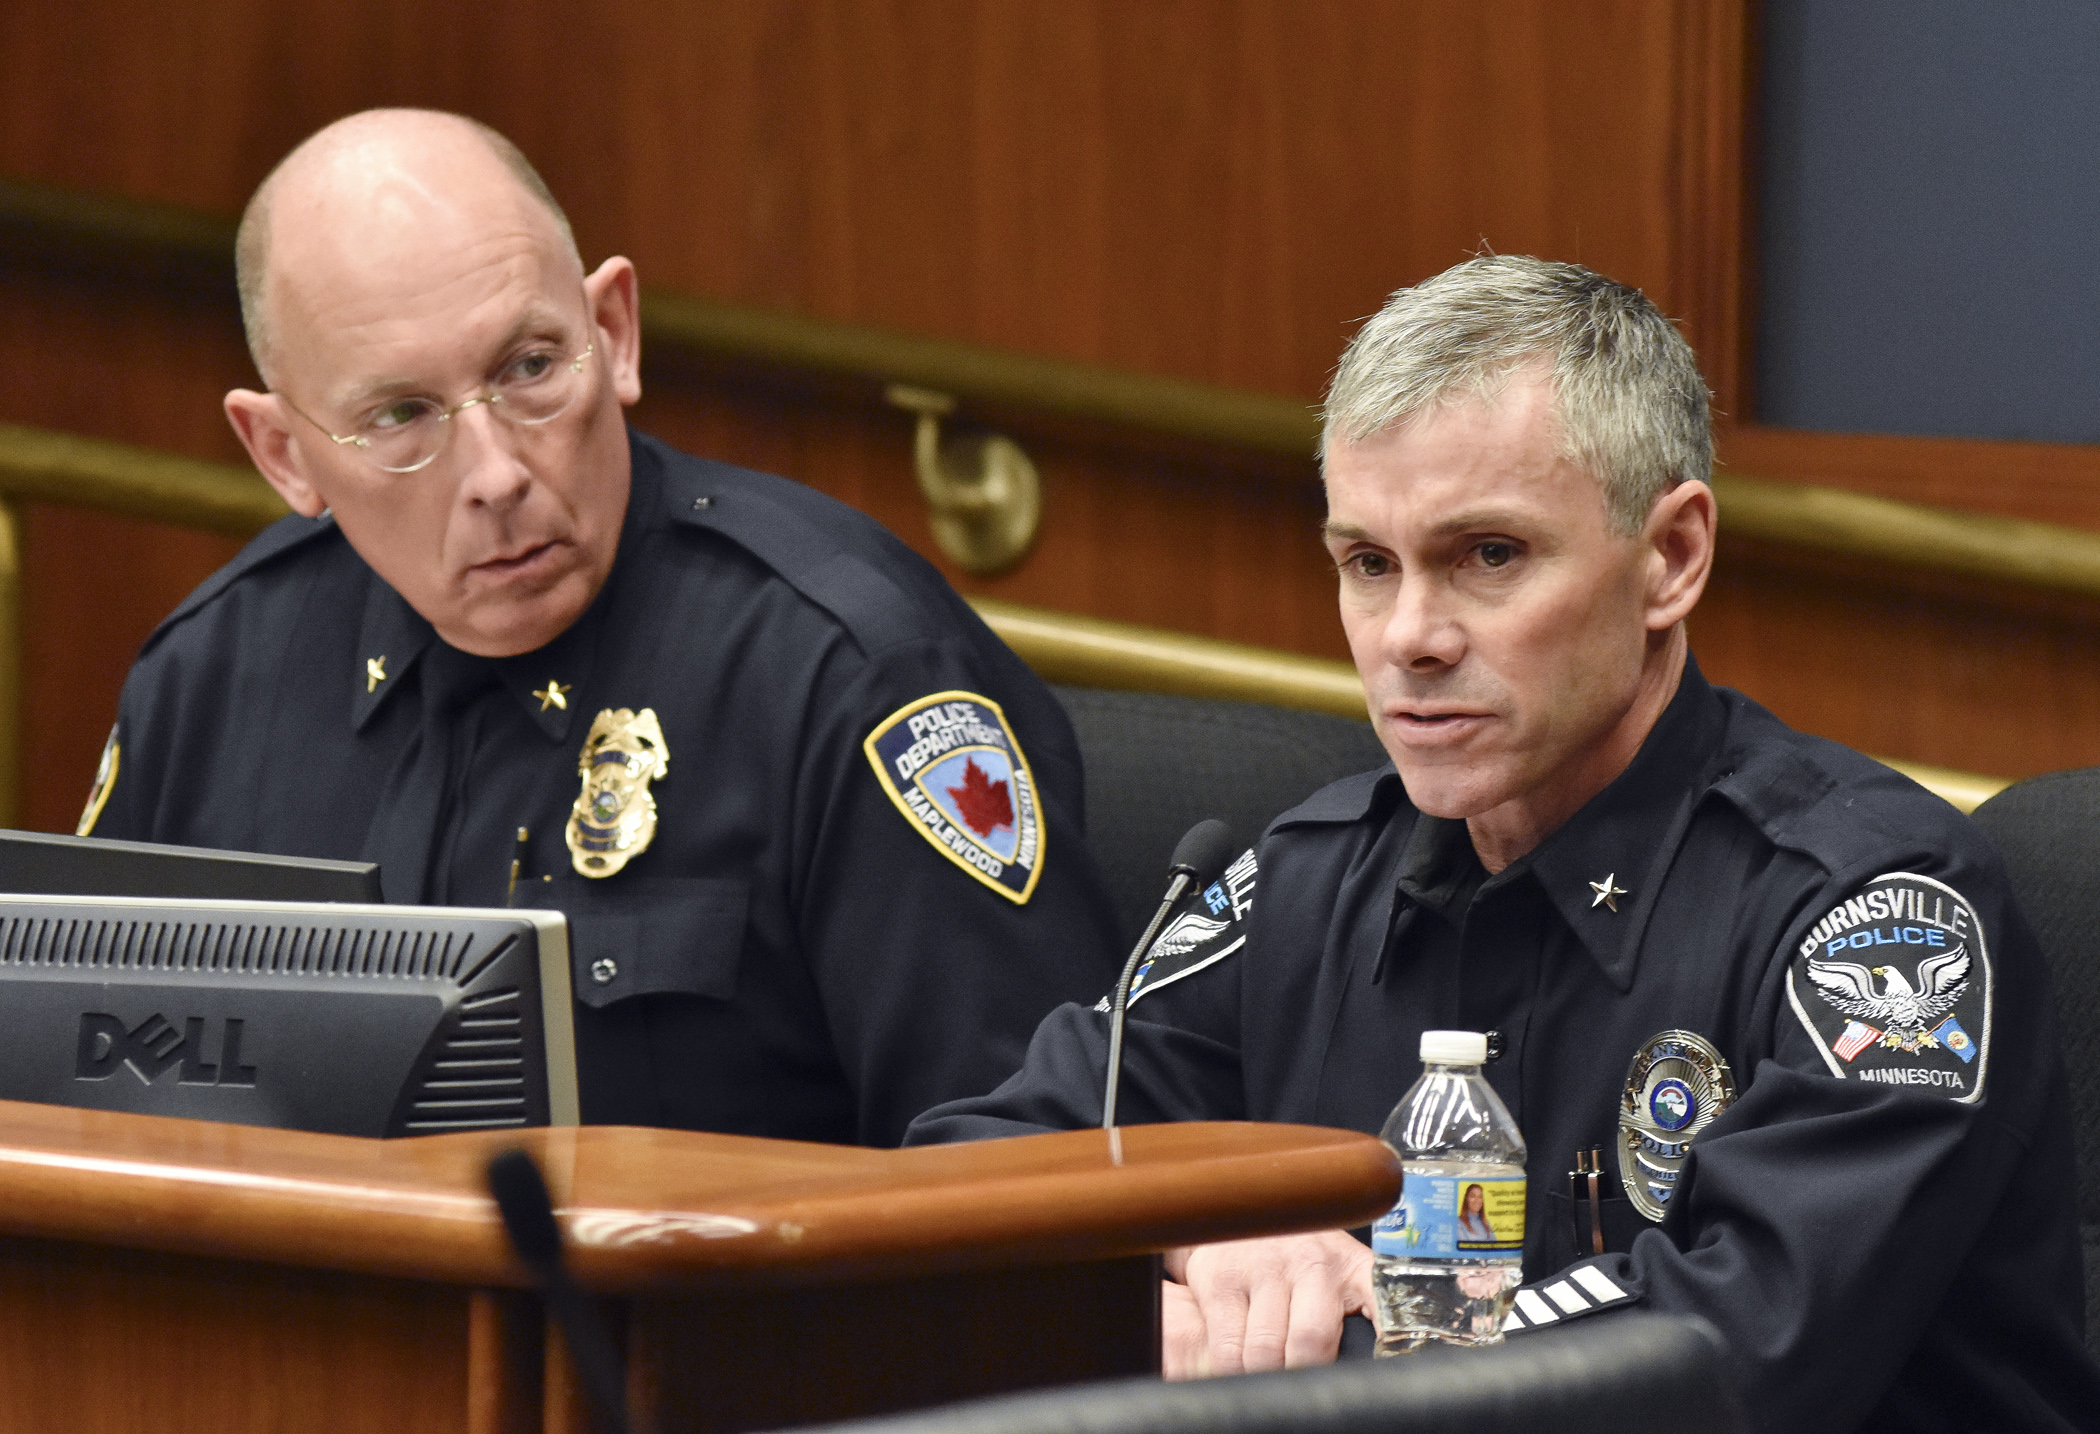 Maplewood Police Chief Paul Schnell, left, and Burnsville Police Chief Eric Gieseke testify on law enforcement use of body cameras during the Dec. 1 meeting of the Legislative Commission on Data Practices. Photo by Andrew VonBank